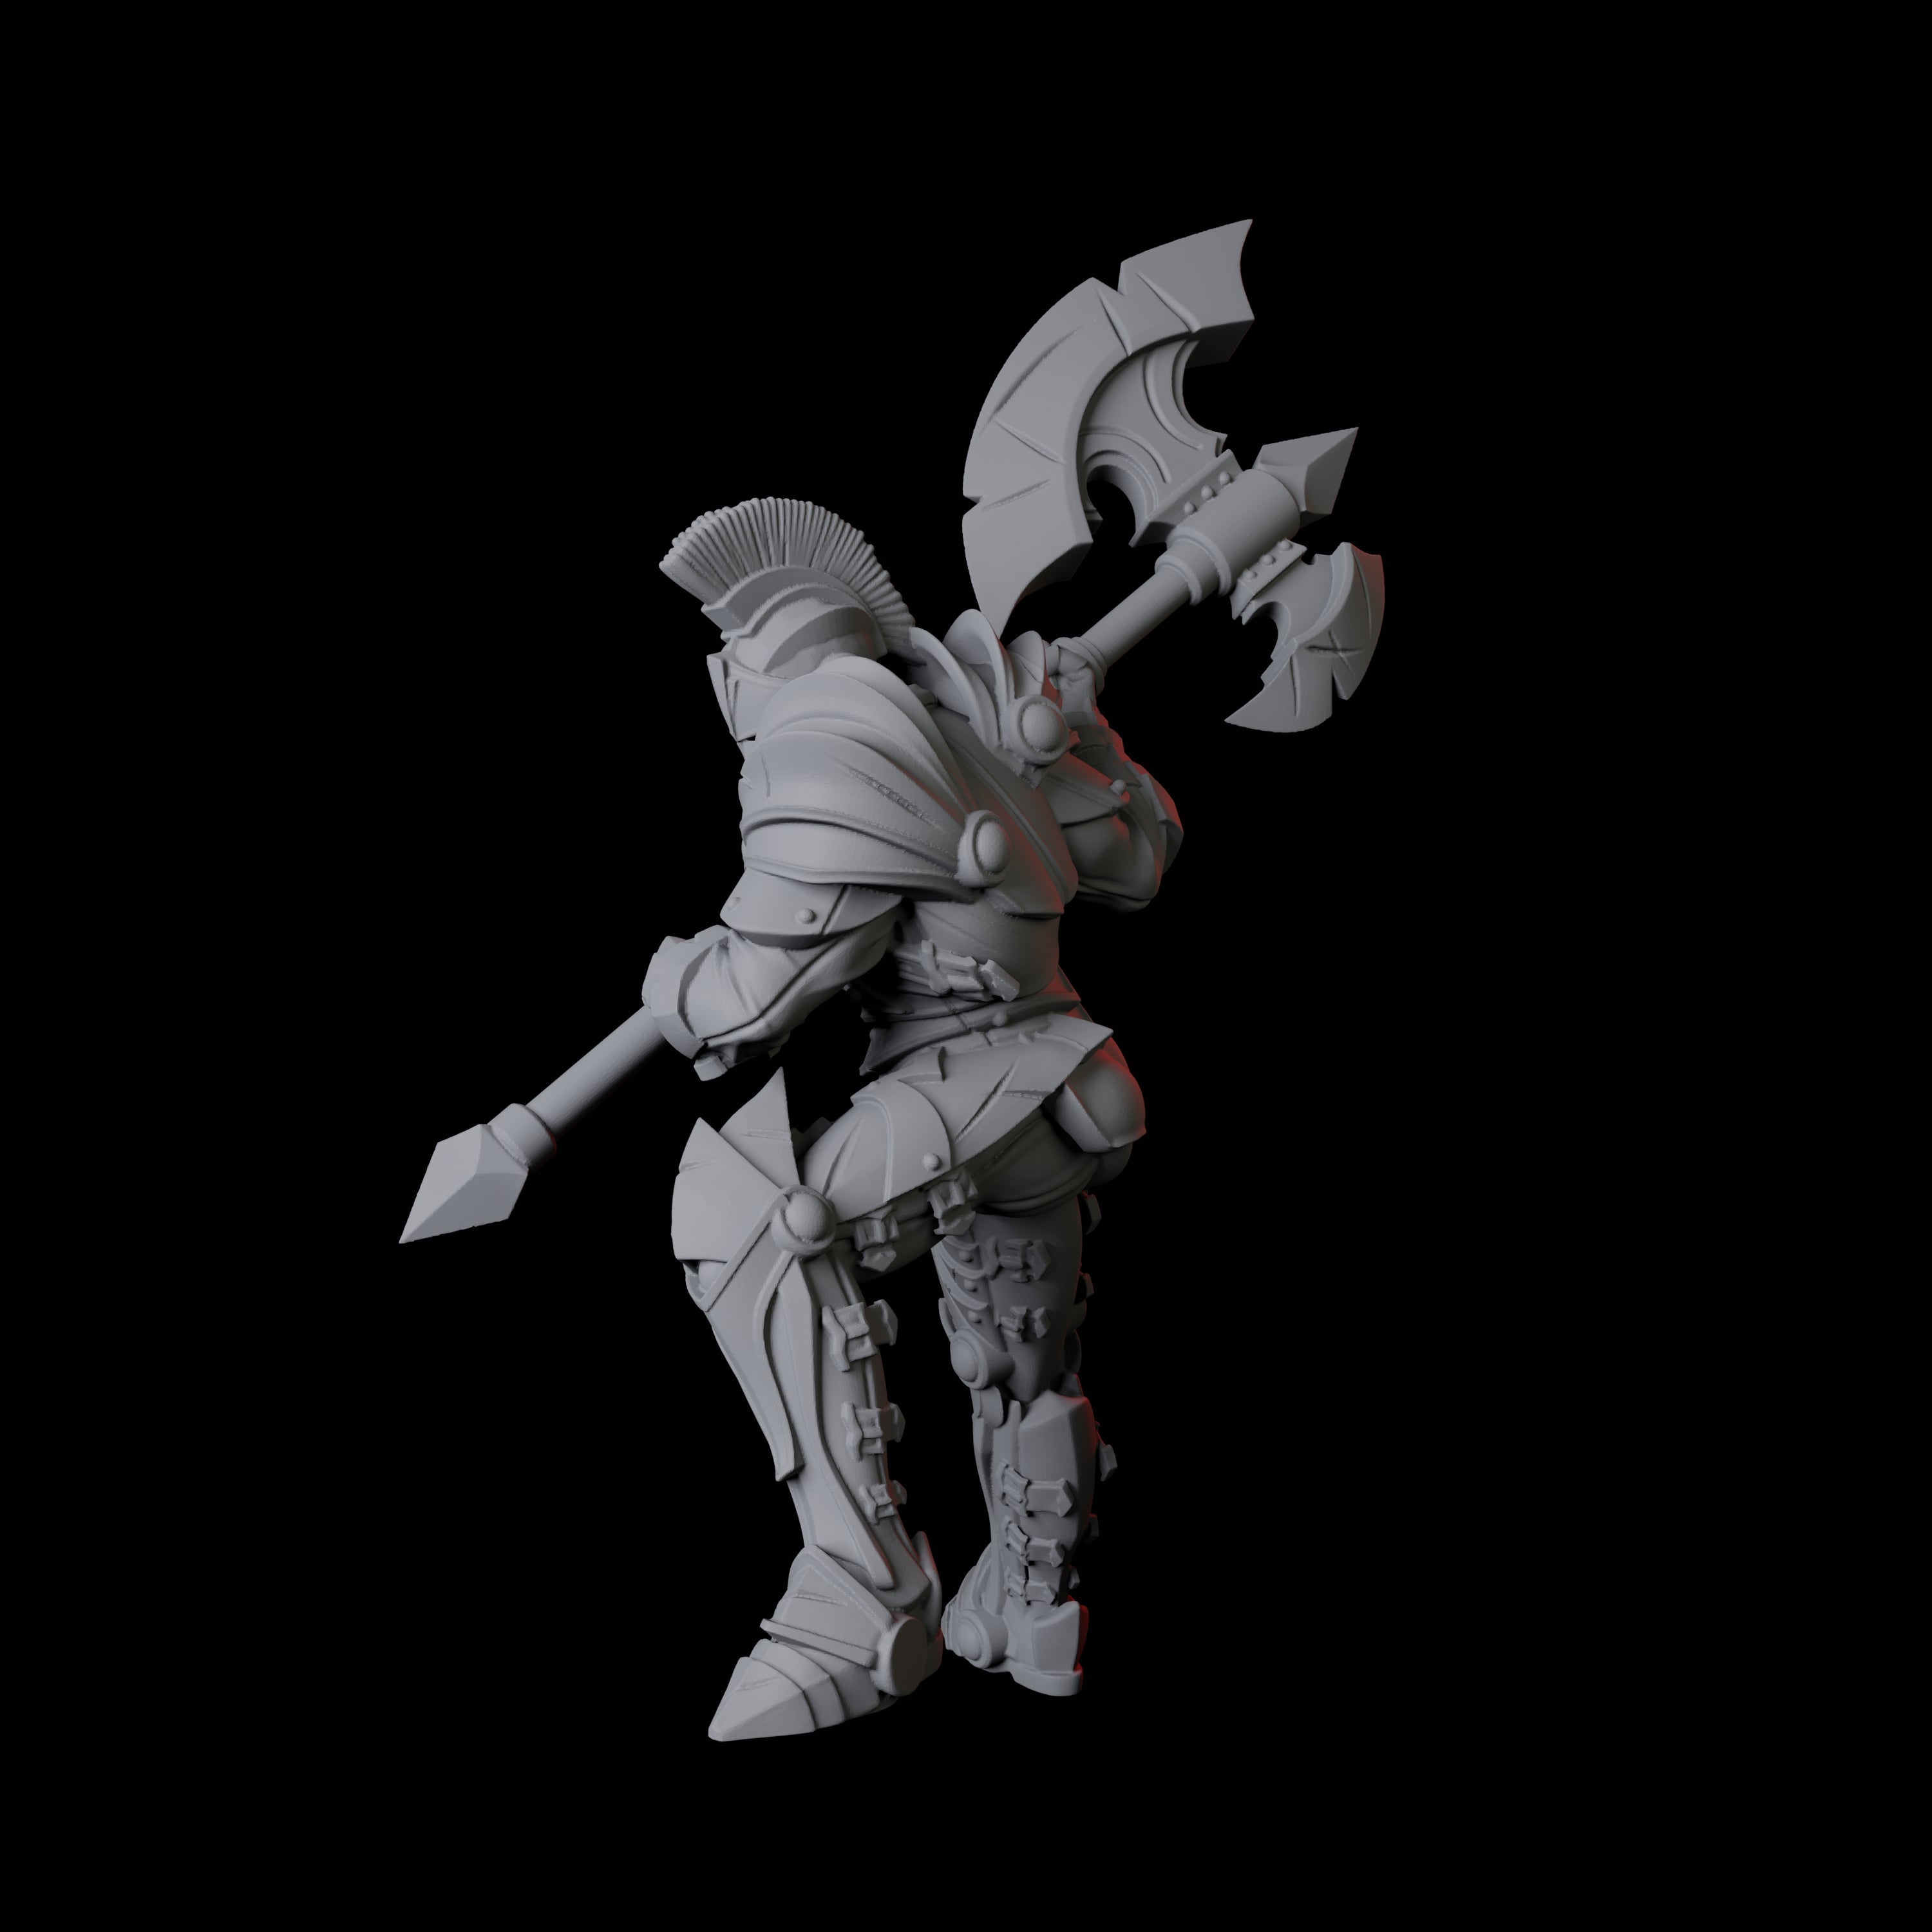 Axe-Wielding Knight C Miniature for Dungeons and Dragons, Pathfinder or other TTRPGs